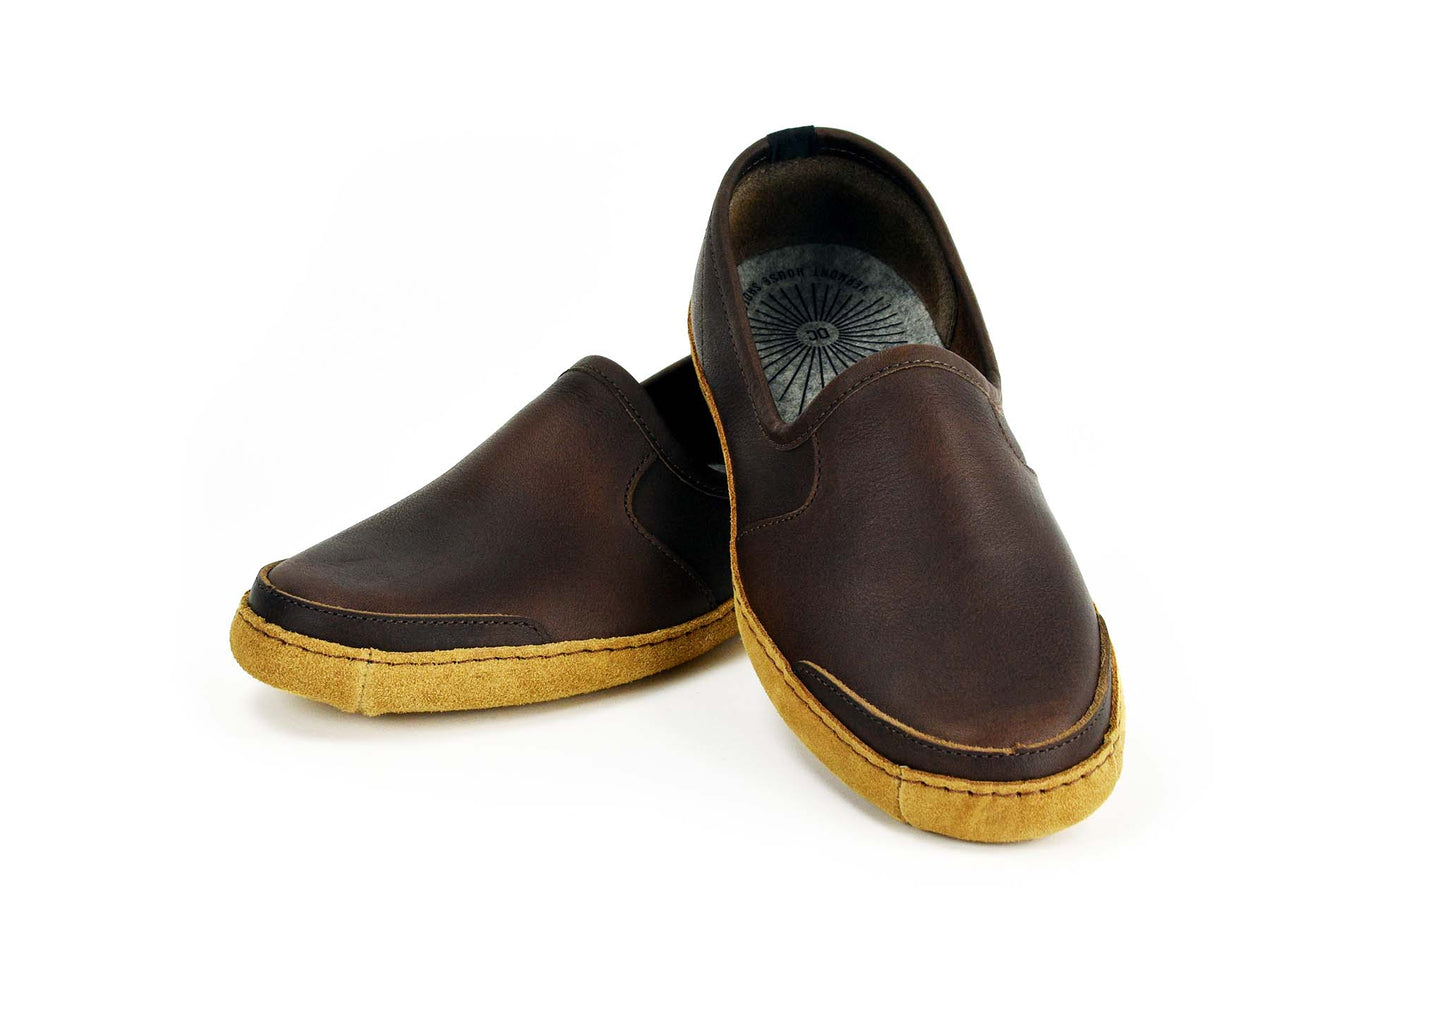 Vermont House Shoes - Loafer - Chocolate alternate view